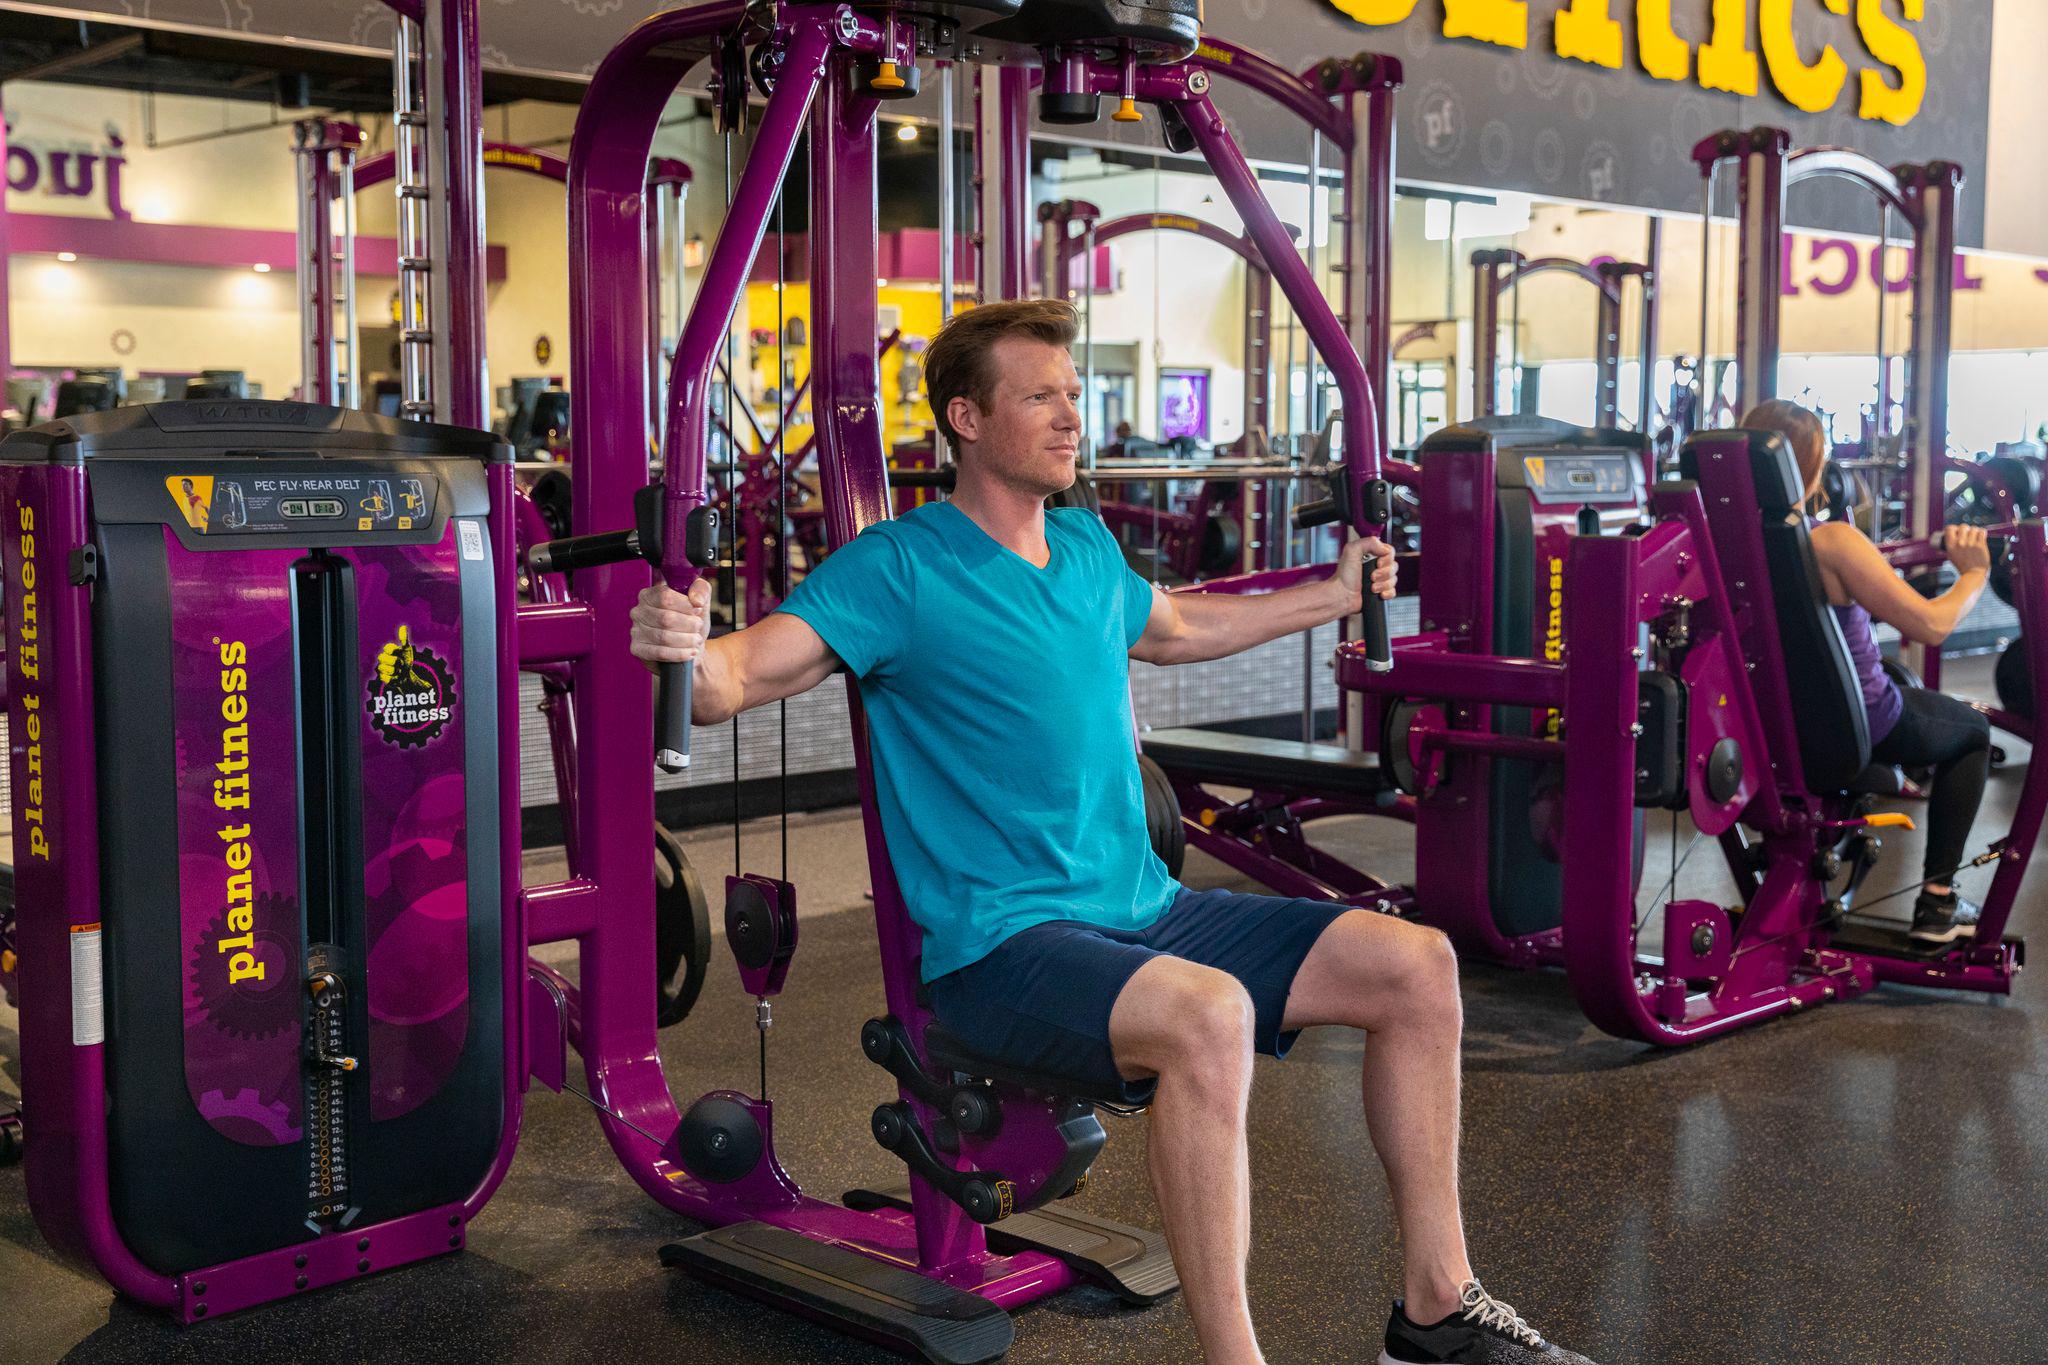 Planet Fitness now in Picayune - Picayune Item